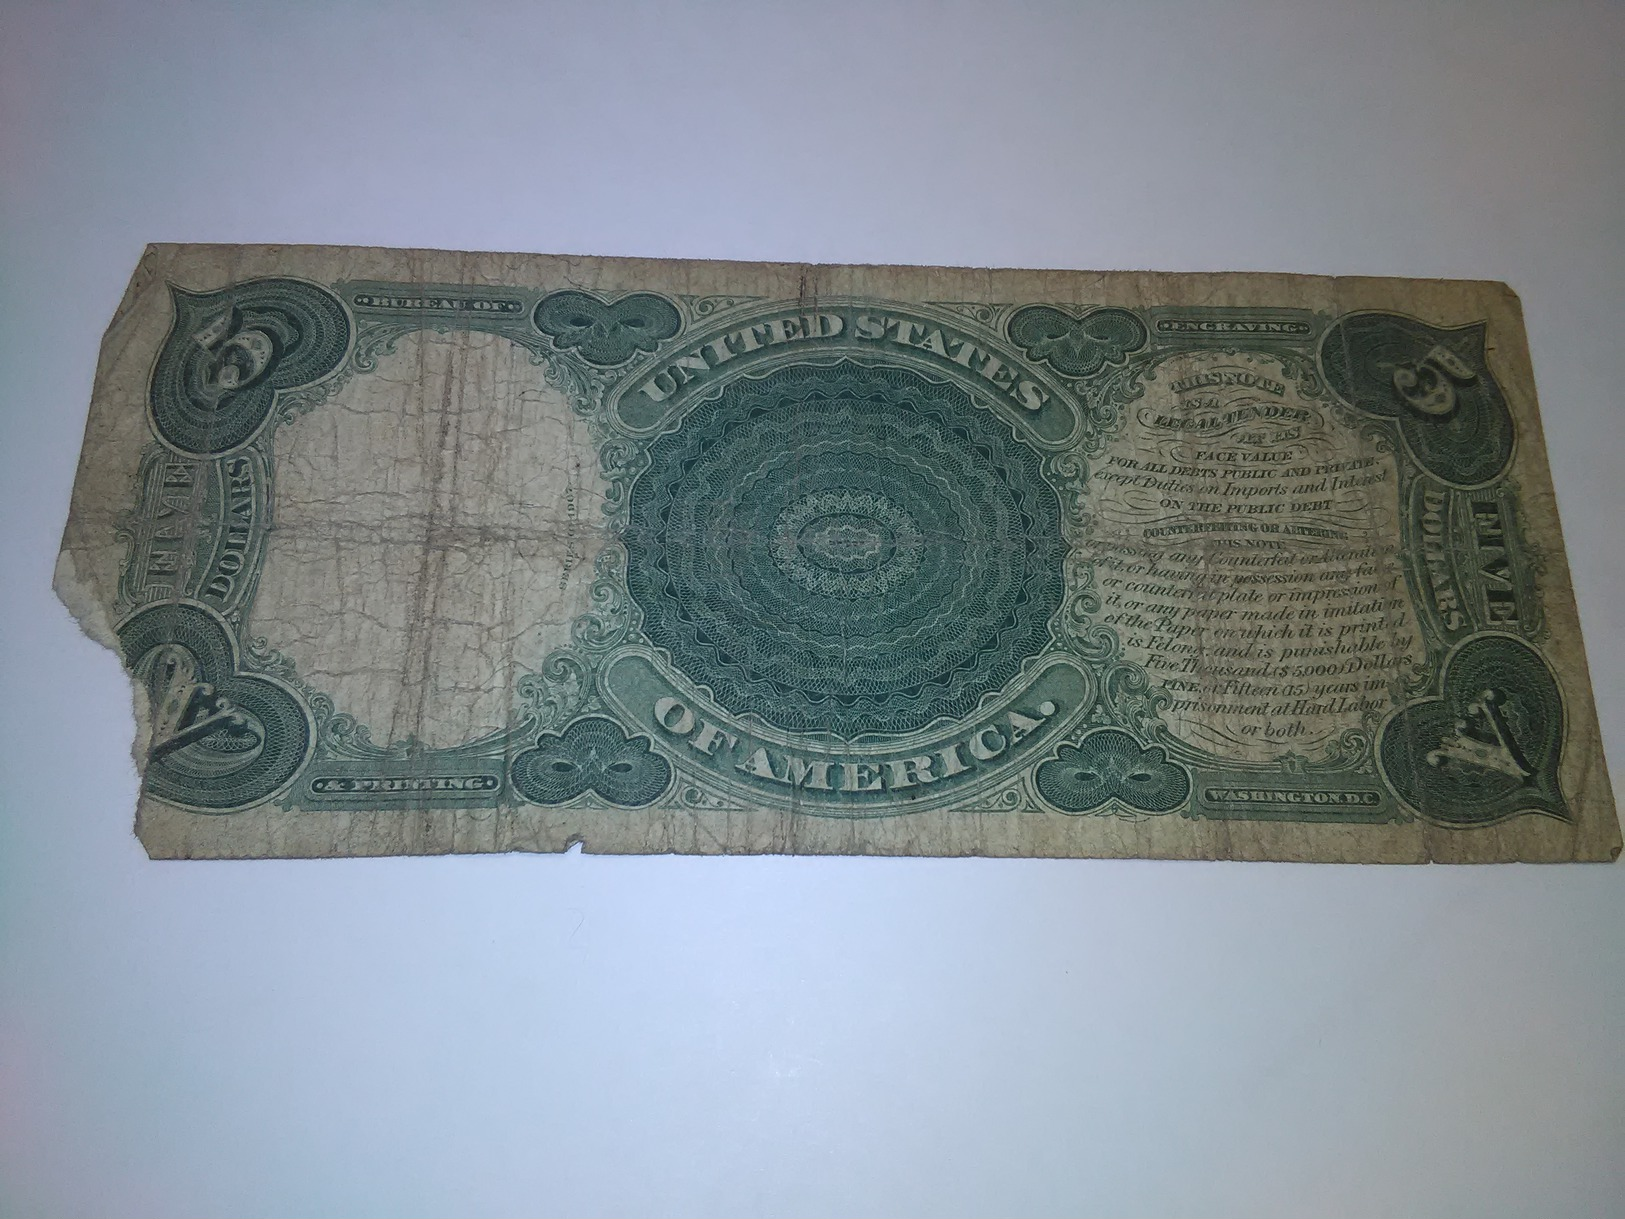 U.S.A. UNITED STAES 1907 $5  BANKNOTE LOC#A1267 - United States Notes (1862-1923)